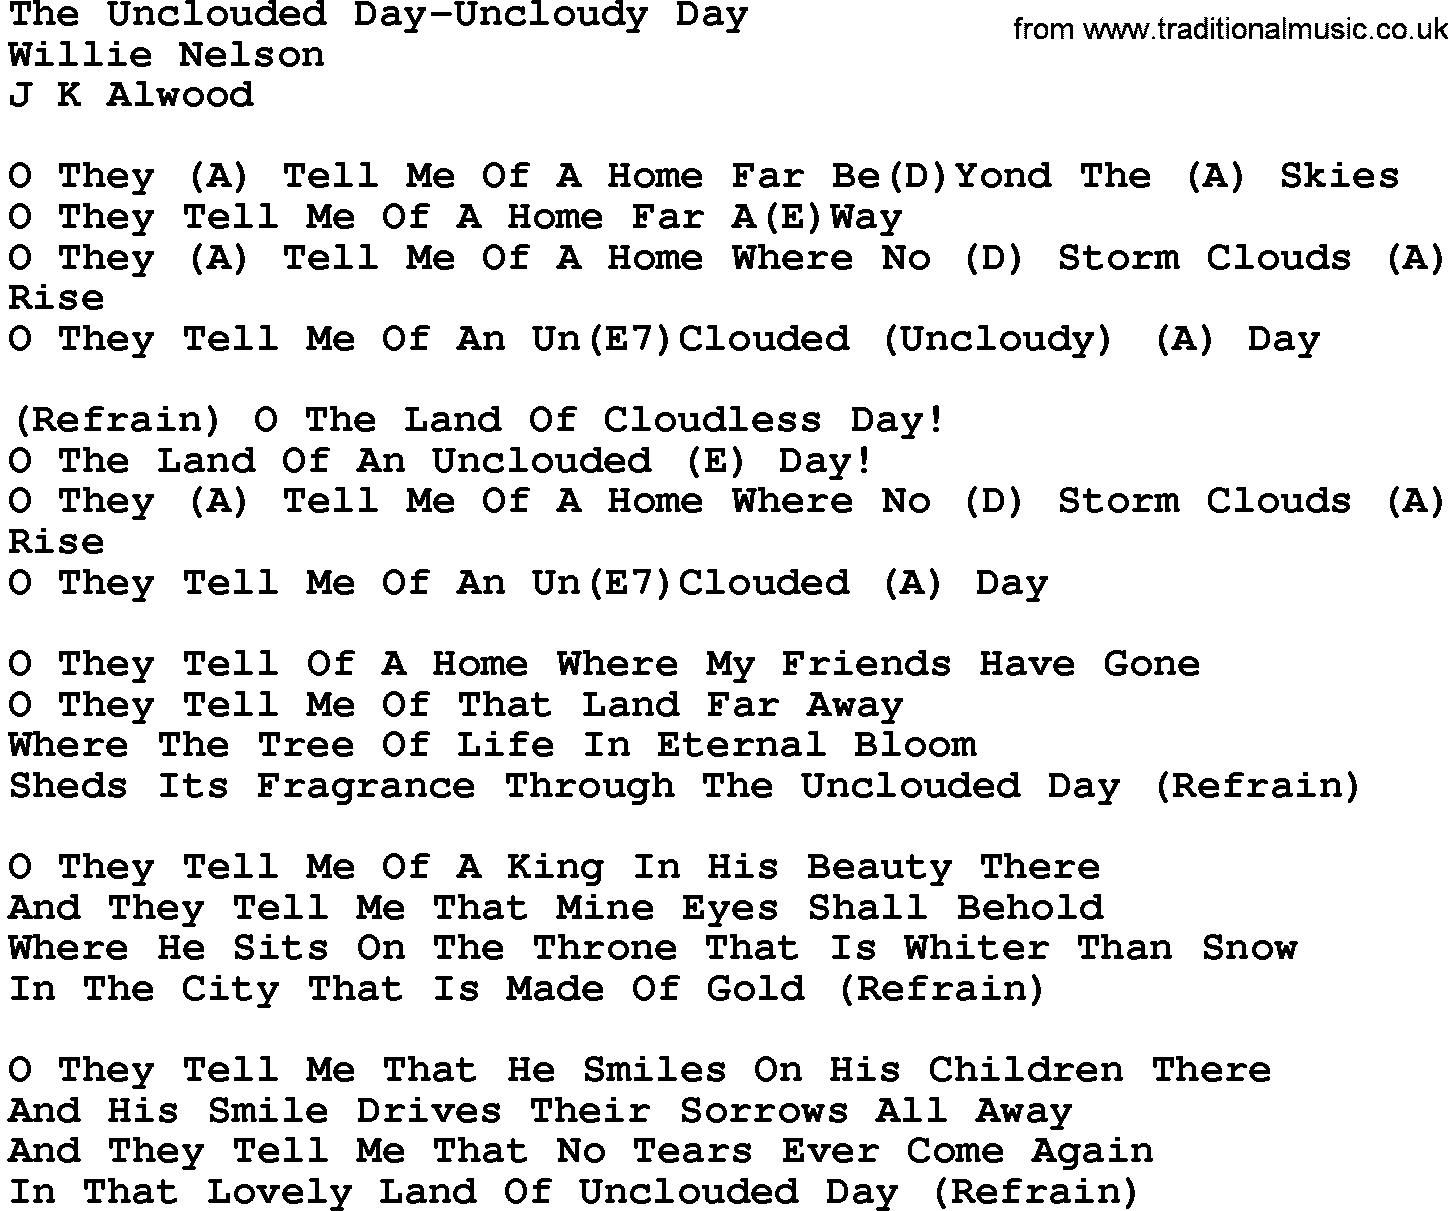 Country music song: The Unclouded Day-Uncloudy Day lyrics and chords